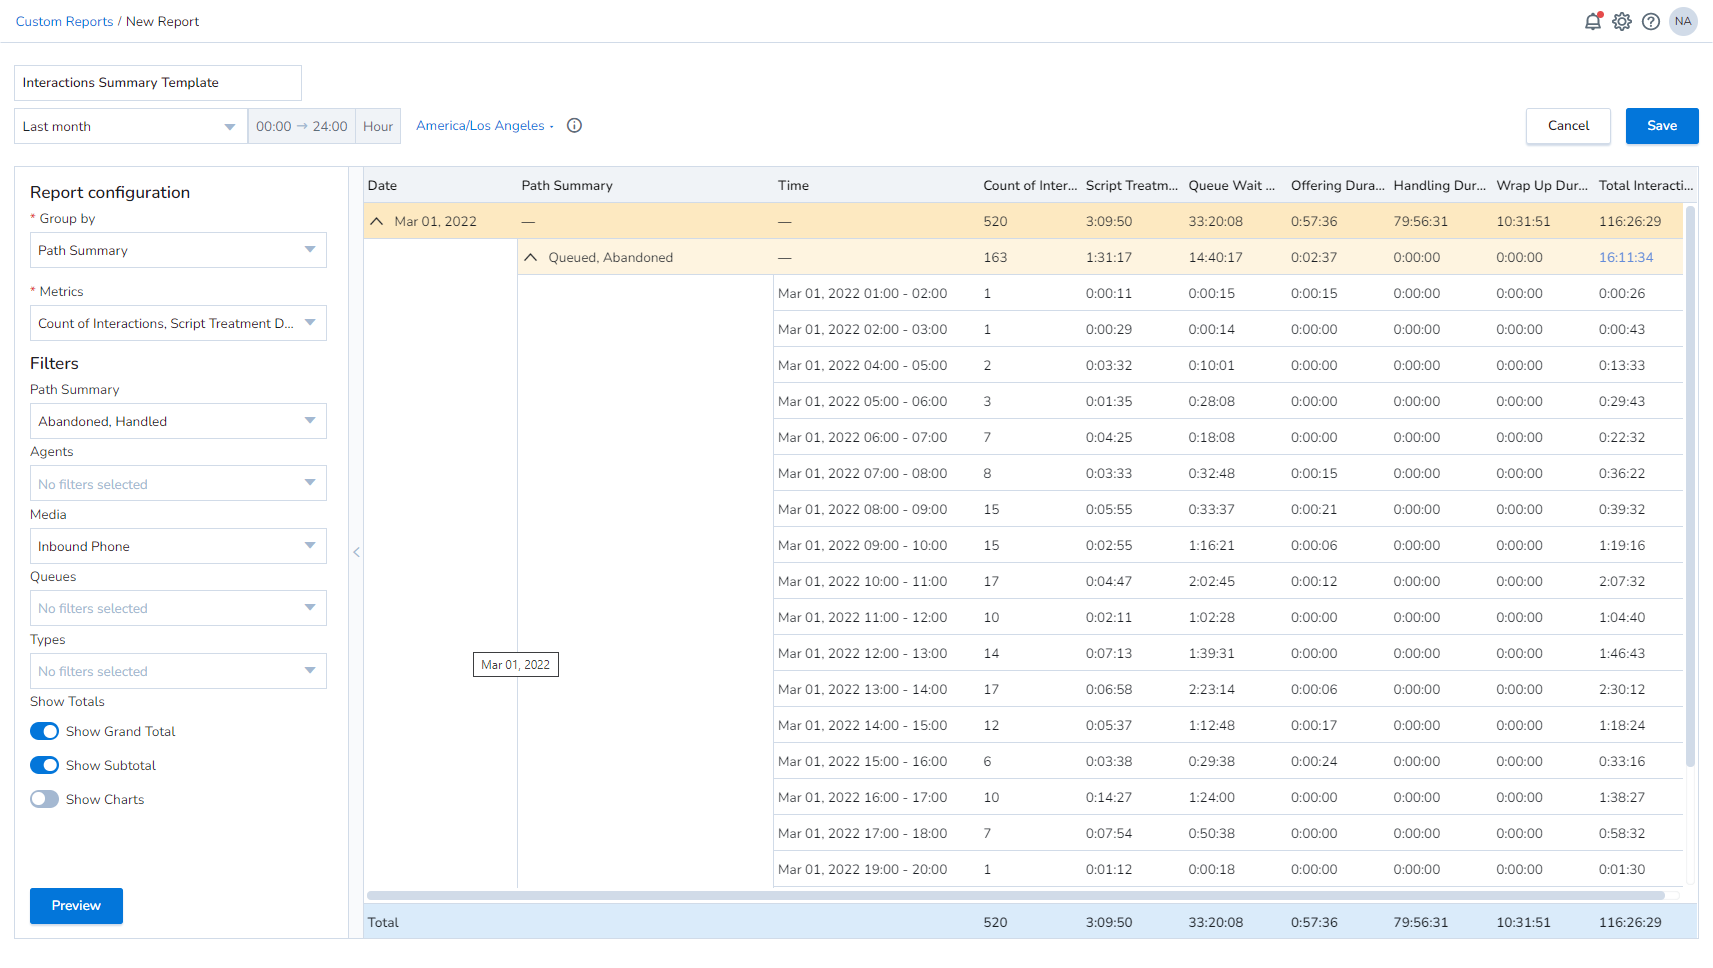 8x88x8 Analytics for Contact Center—Interactions Summary report